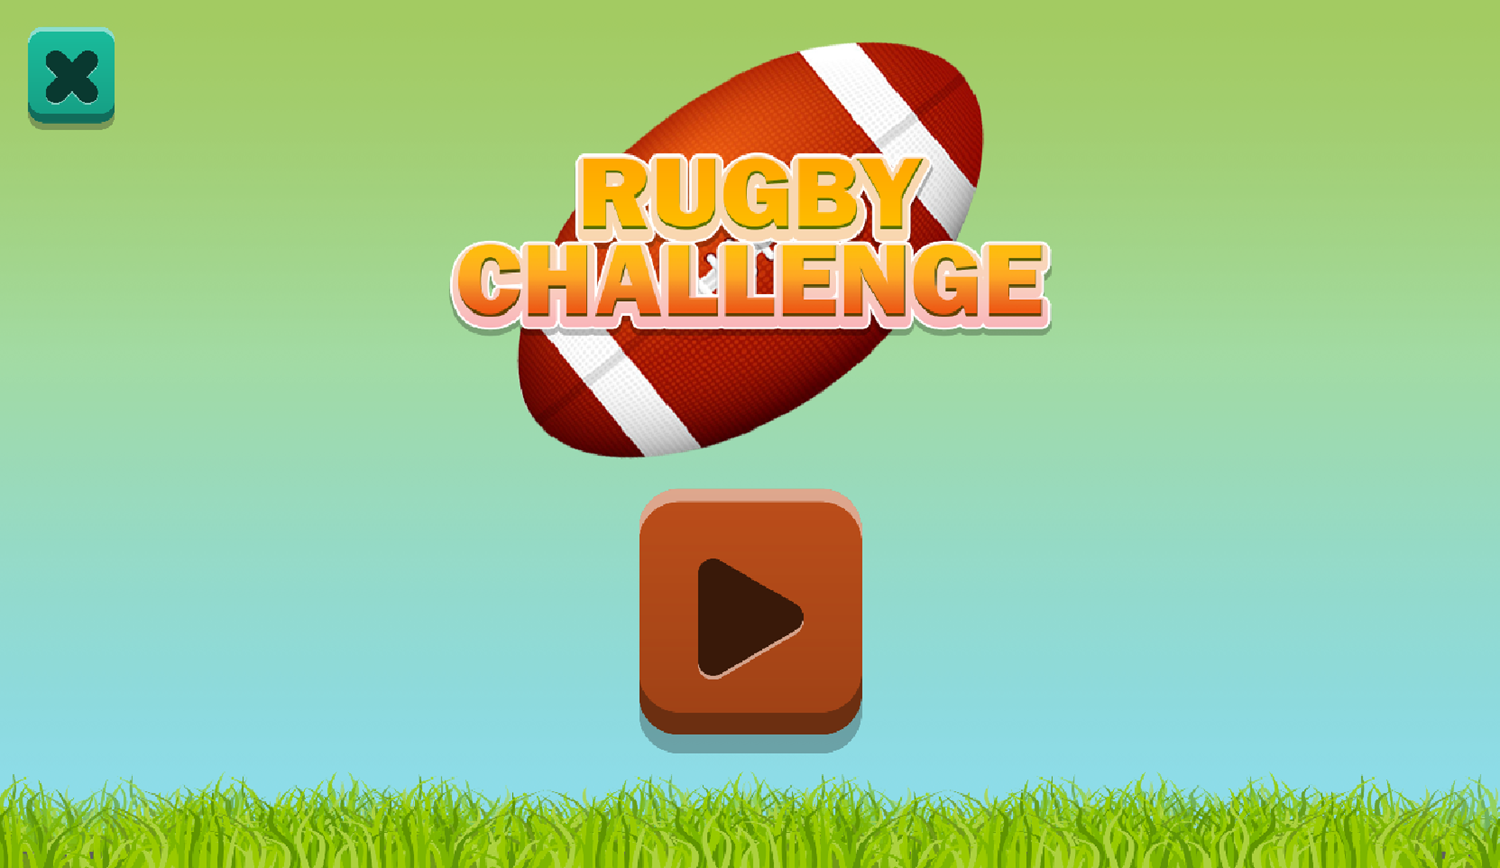 Rugby Challenge Game Welcome Screen Screenshot.